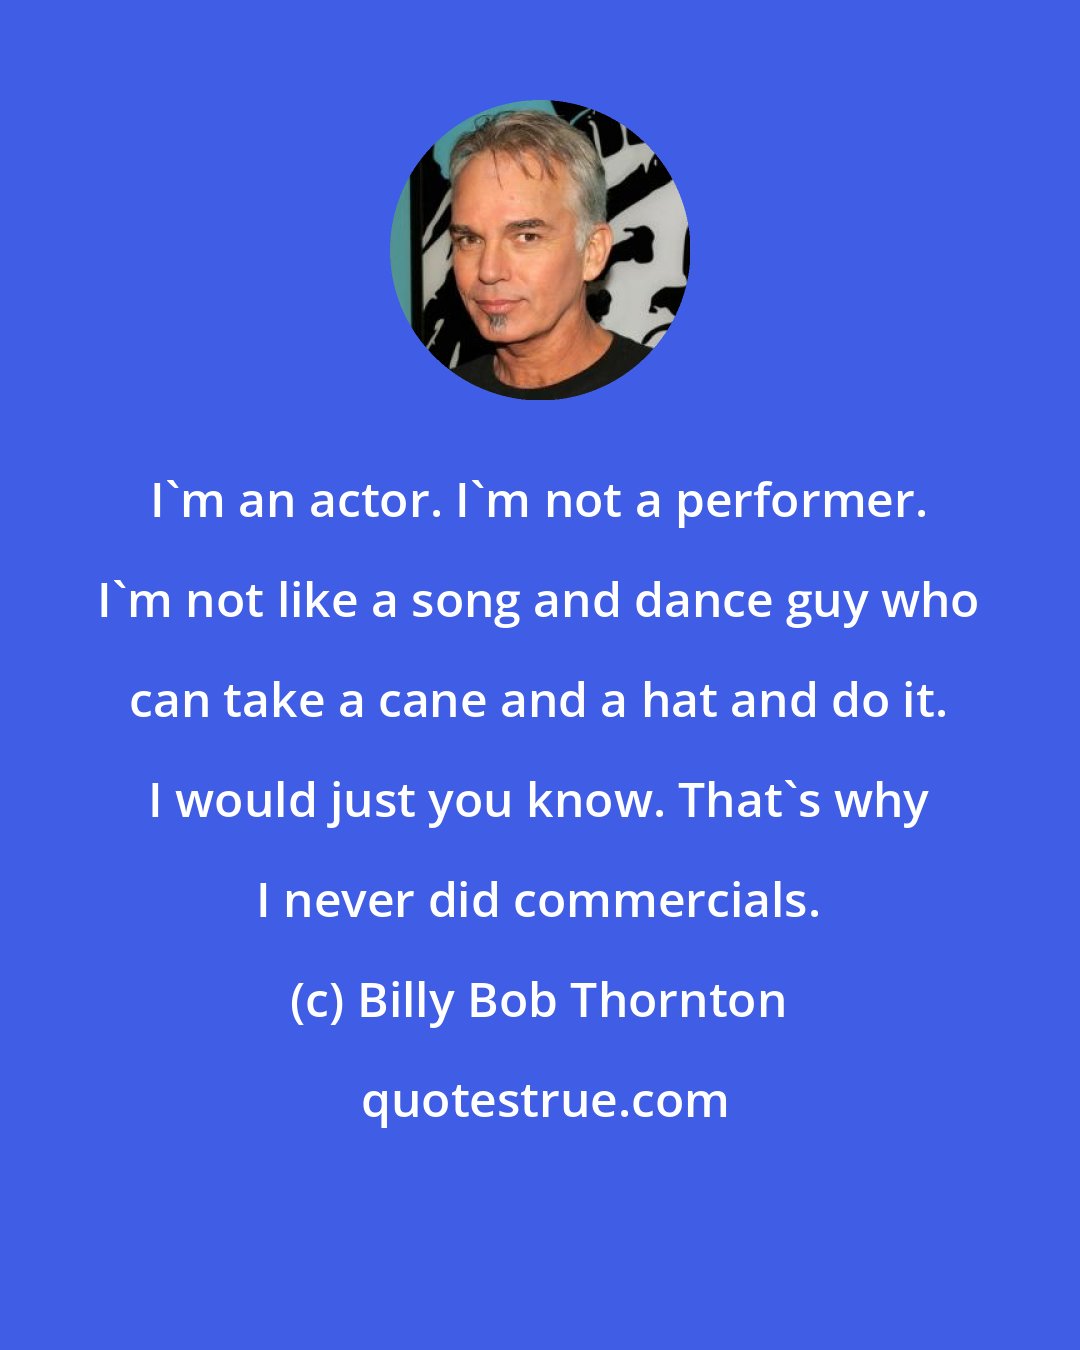 Billy Bob Thornton: I'm an actor. I'm not a performer. I'm not like a song and dance guy who can take a cane and a hat and do it. I would just you know. That's why I never did commercials.